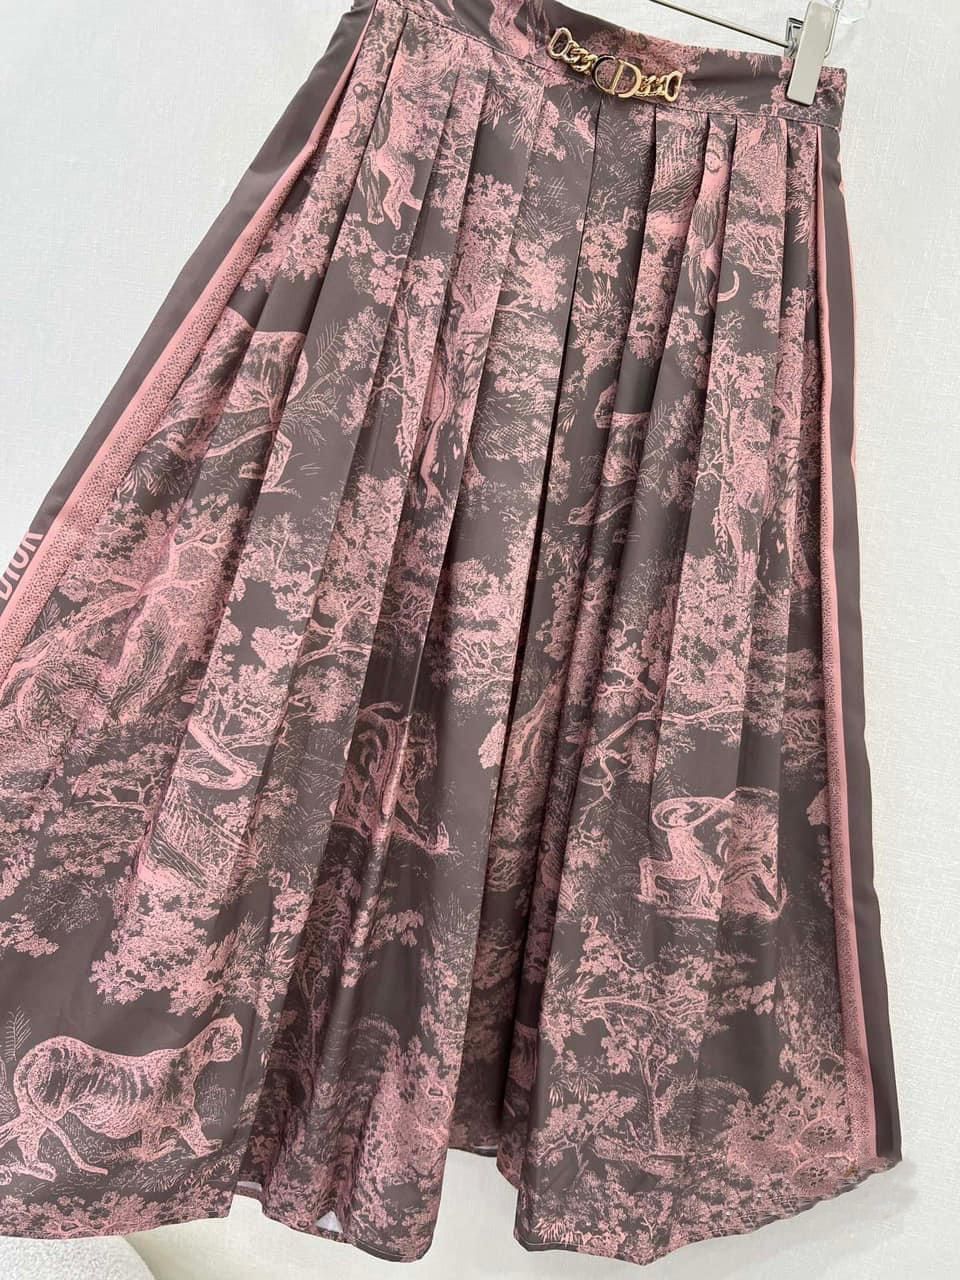 VÁY NỮ DÀI DIORIVIERA FLARED SKIRT GRAY AND PINK COTTON MUSLIN WITH TOILE DE JOUY REVERSE MOTIF 4